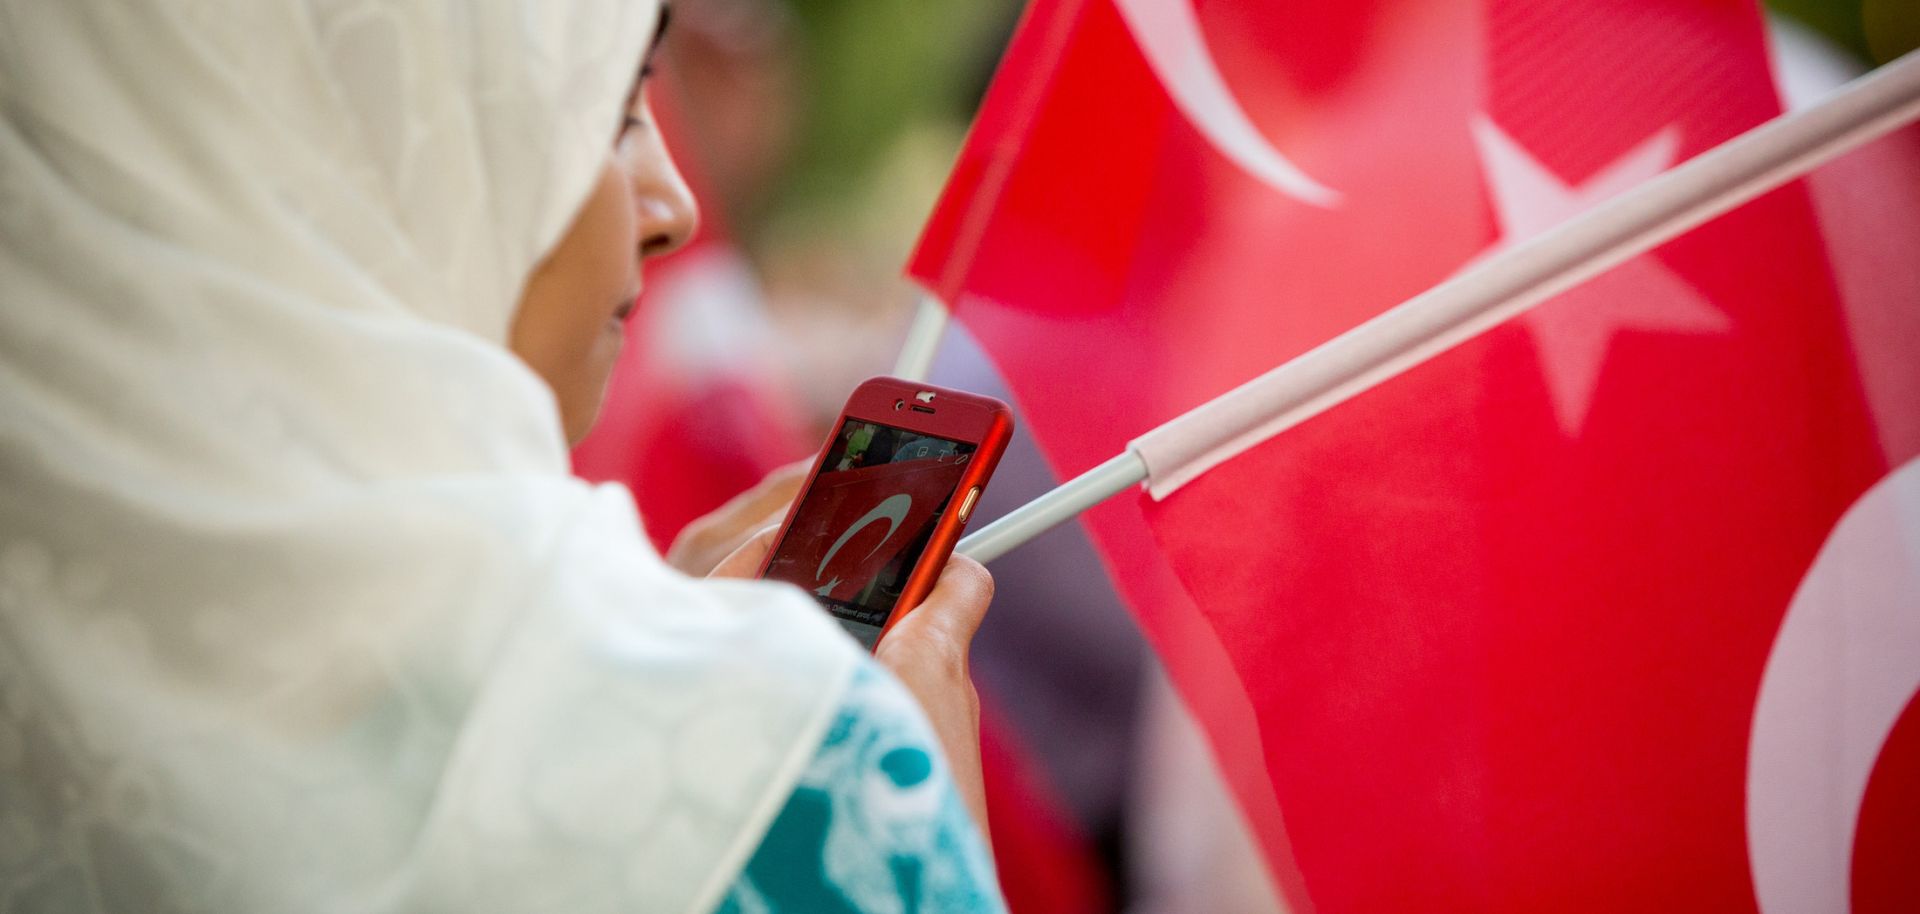 A woman shares a photo of the Turkish flag on social media during a protest in Washington D.C. on July 15, 2016. 